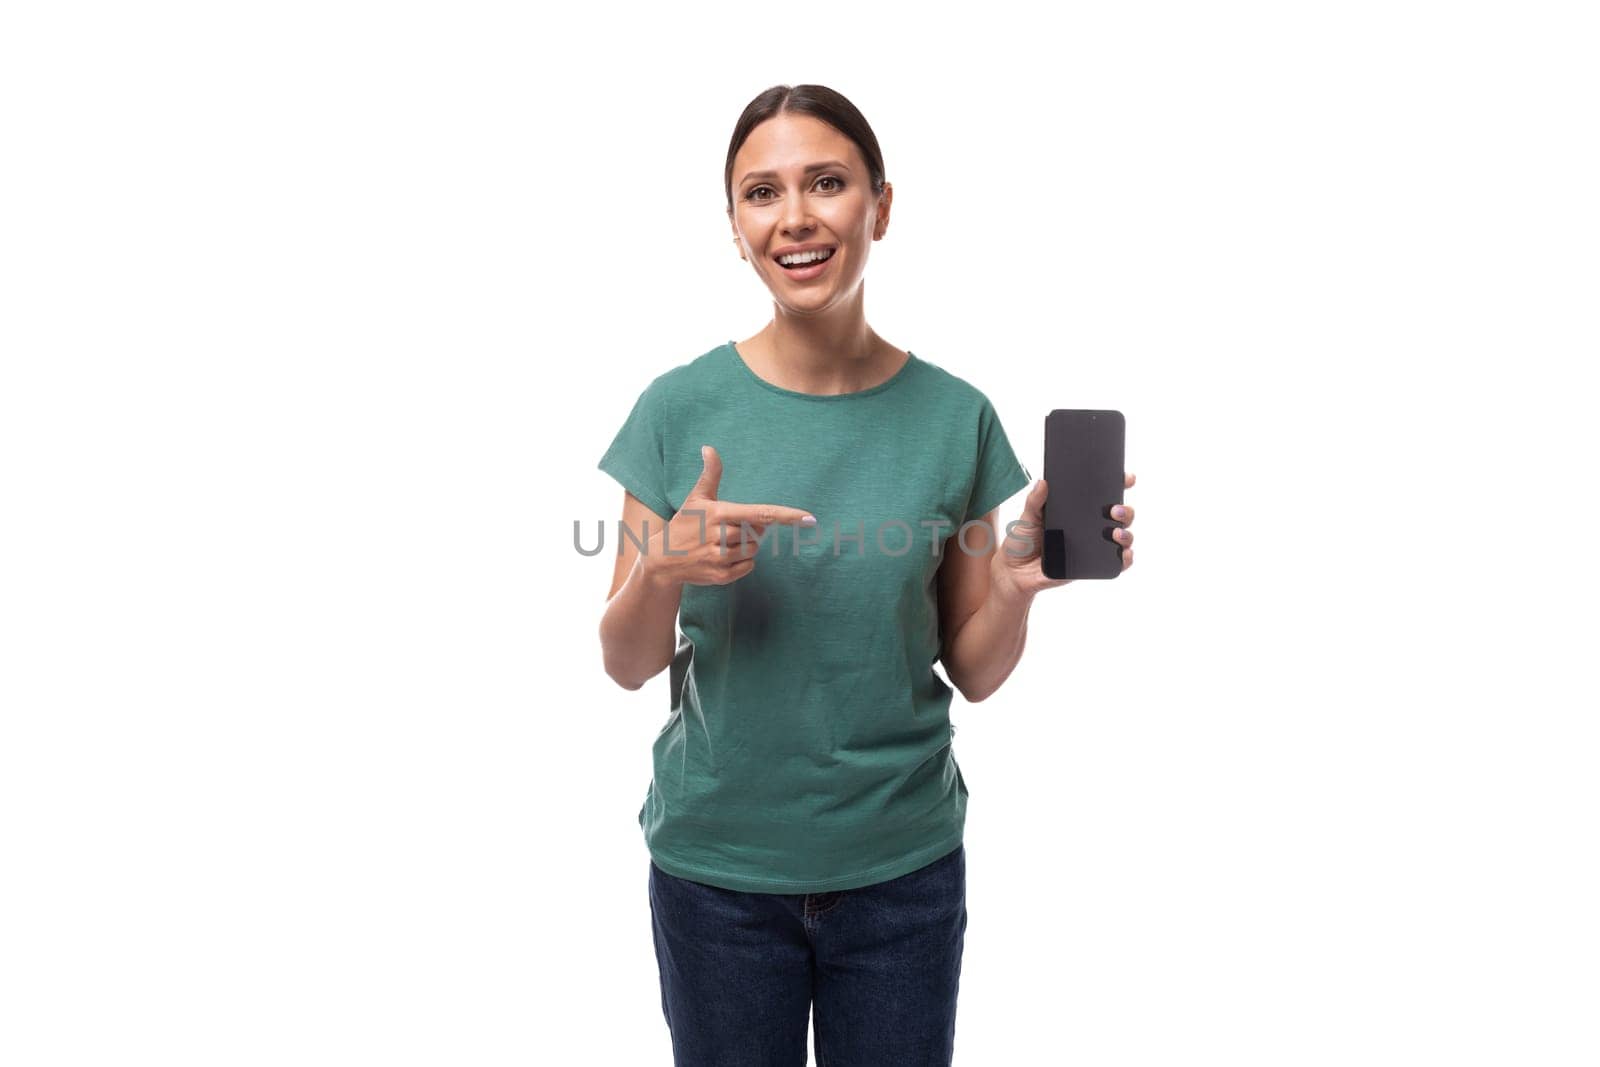 young energetic slender european woman with a ponytail hairstyle dressed in a green t-shirt holds a smartphone.